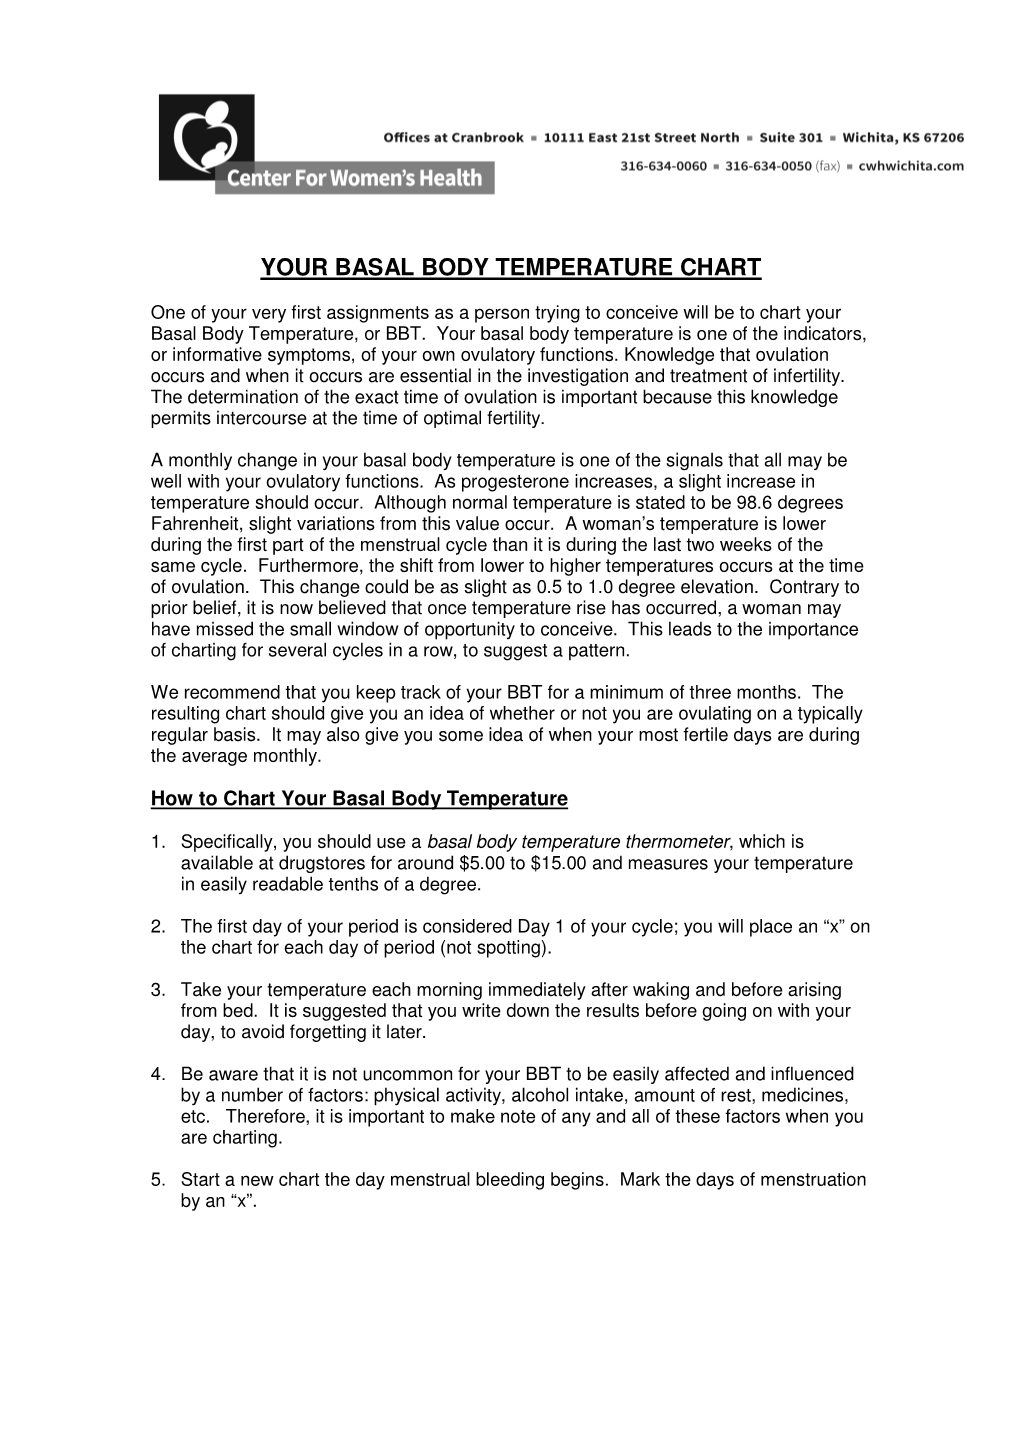 Your Basal Body Temperature Chart